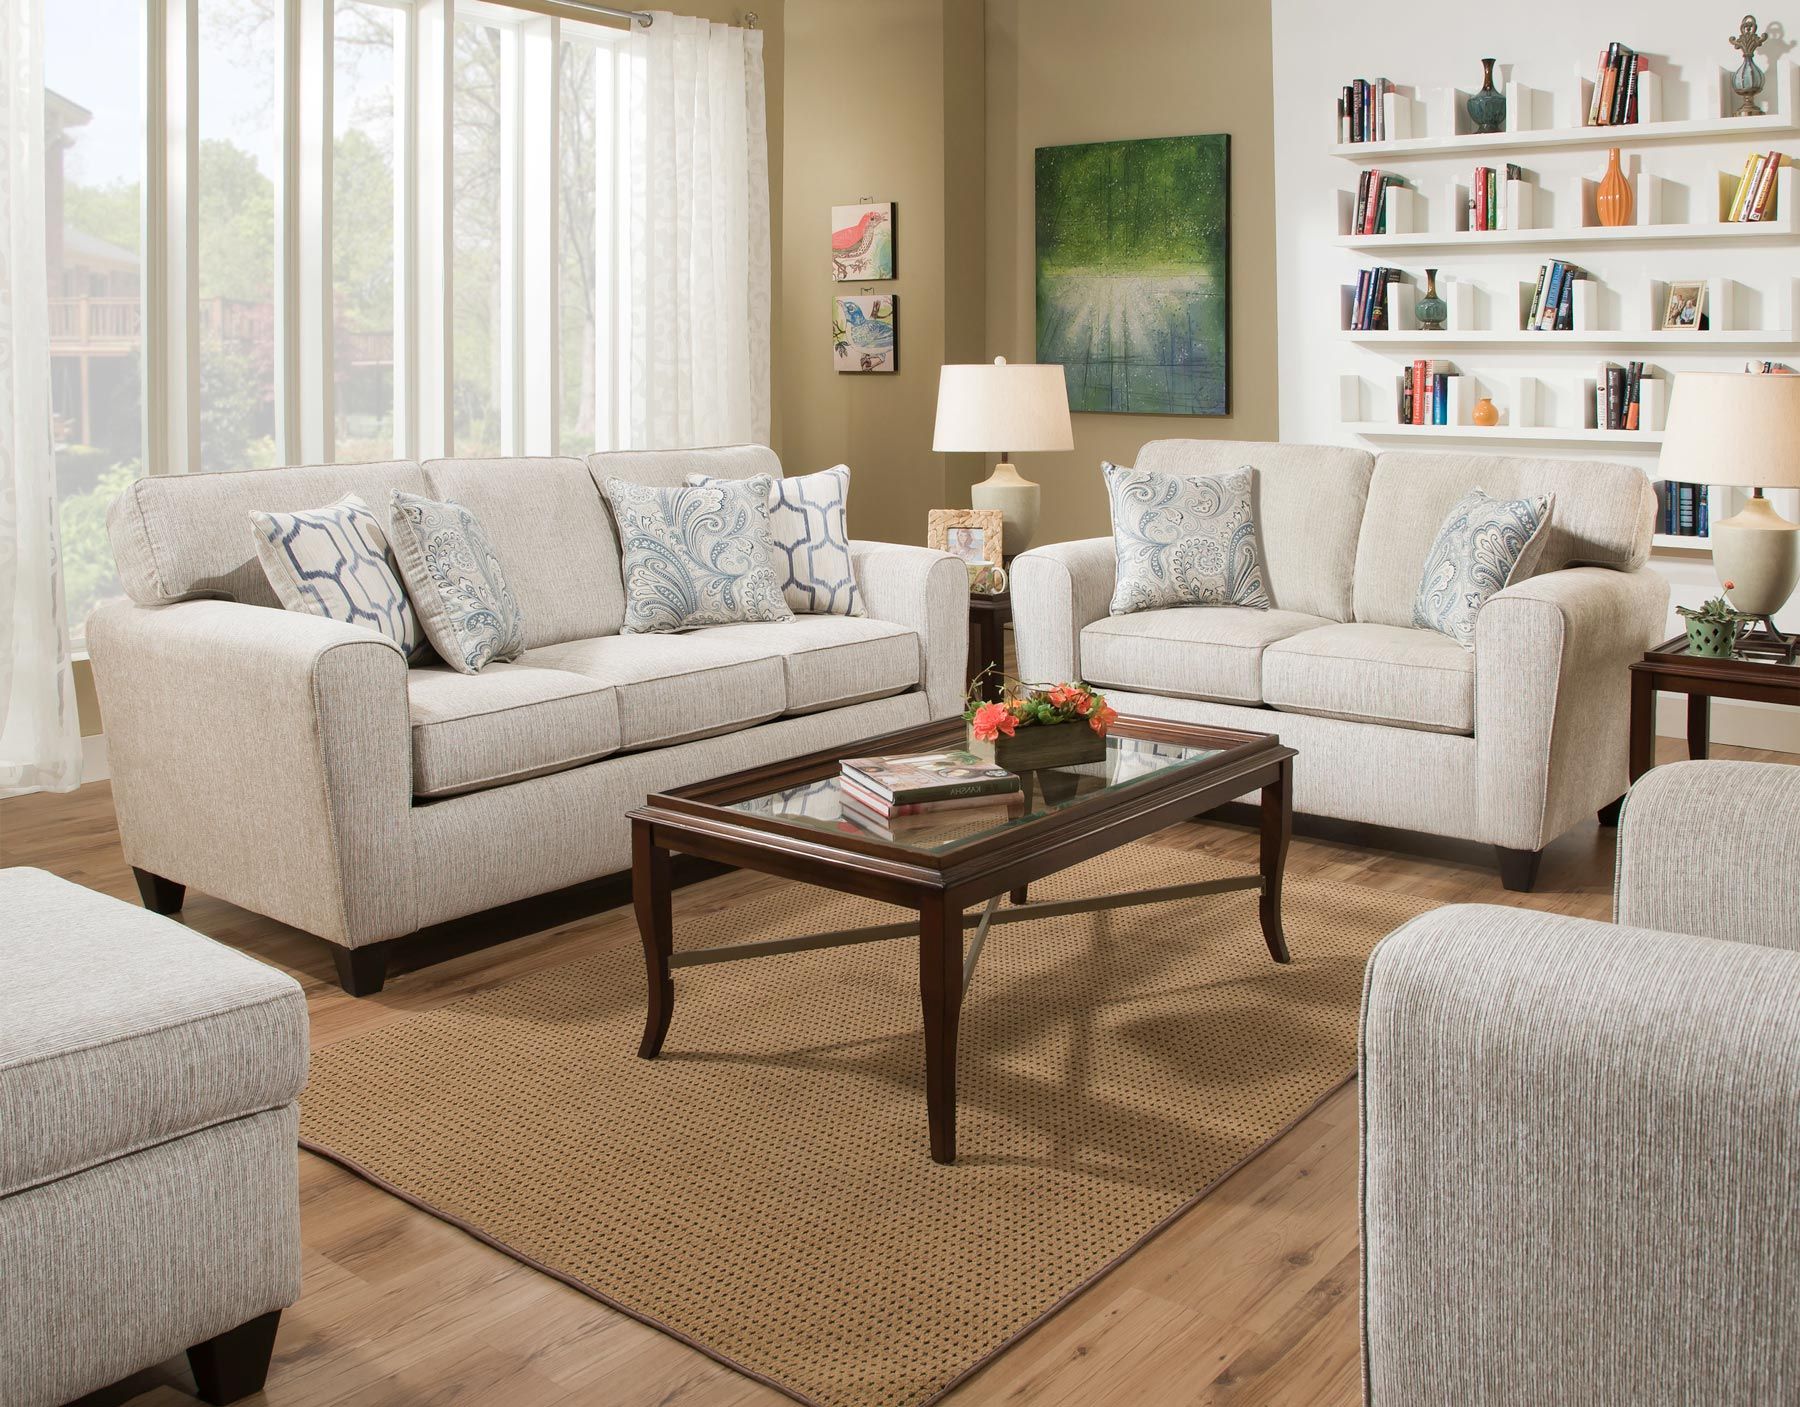 Uptown Ecru Sofa And Loveseat Inside Ecru And Otter Console Tables (View 12 of 20)